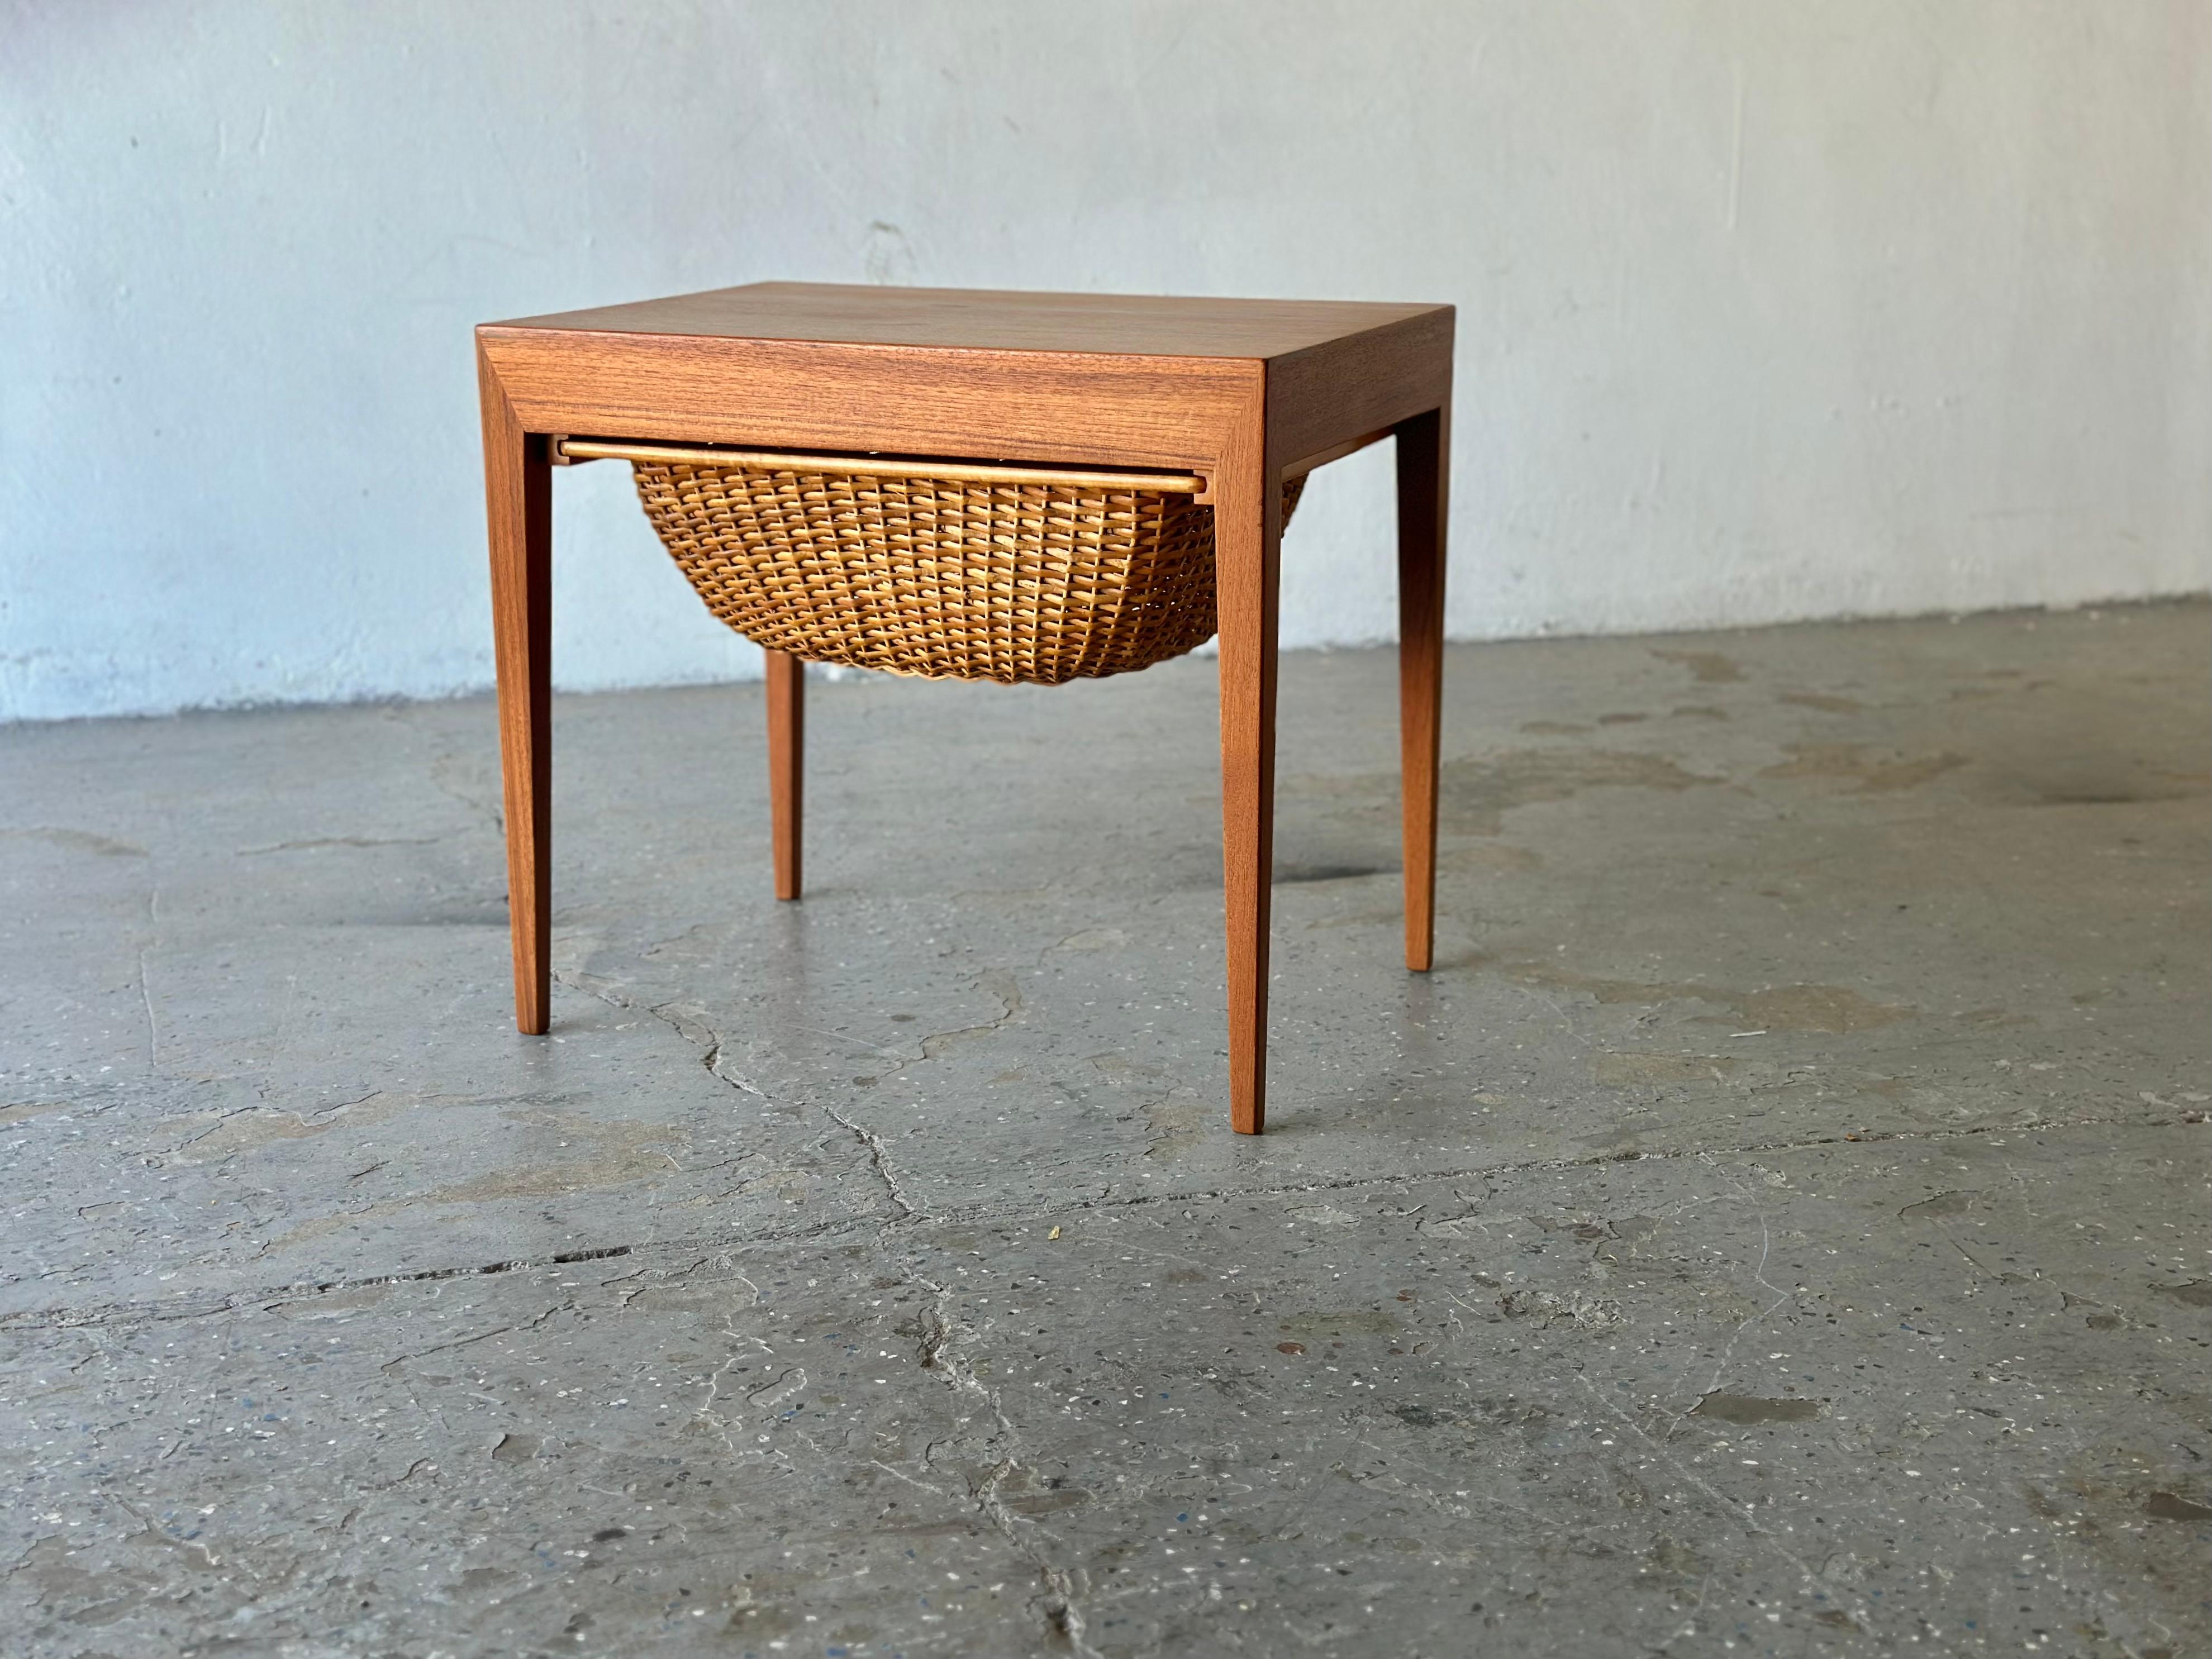 Sewing bedside /end / side table in teak designed by Severin Hansen. Produced by Haslev Møbelsnedkeri, Denmark. Very desirable table finished in teak with a rattan woven shelf beneath a single drawer. 

Gracious proportions and a fantastic